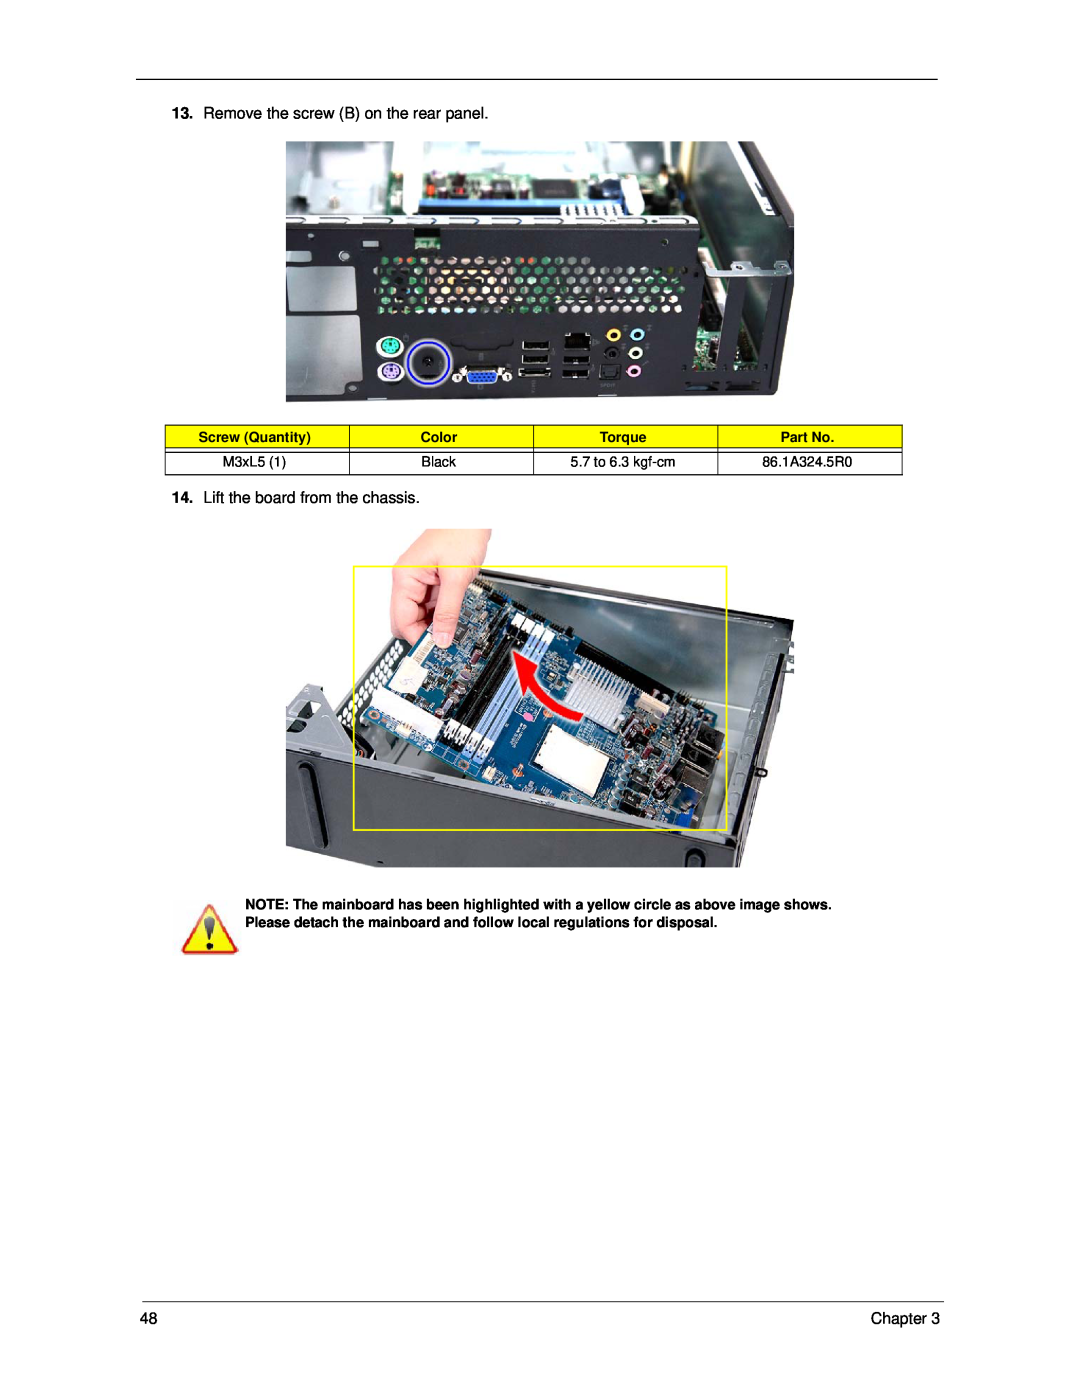 Acer X3300 Remove the screw B on the rear panel, Lift the board from the chassis, Screw Quantity, Color, Torque, M3xL5 